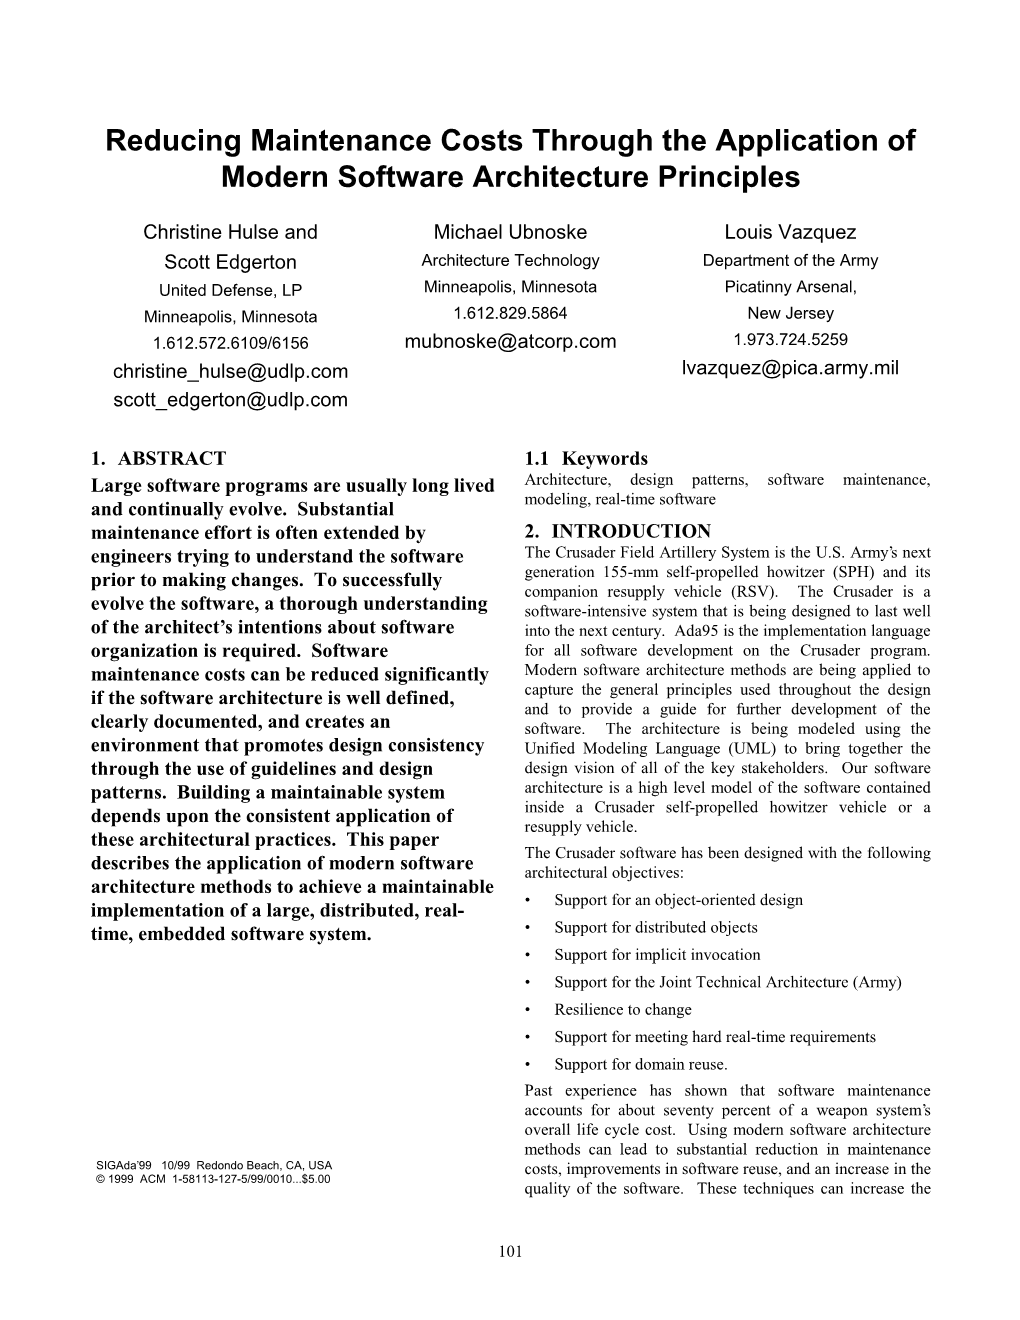 Reducing Maintenance Costs Through the Application of Modern Software Architecture Principles